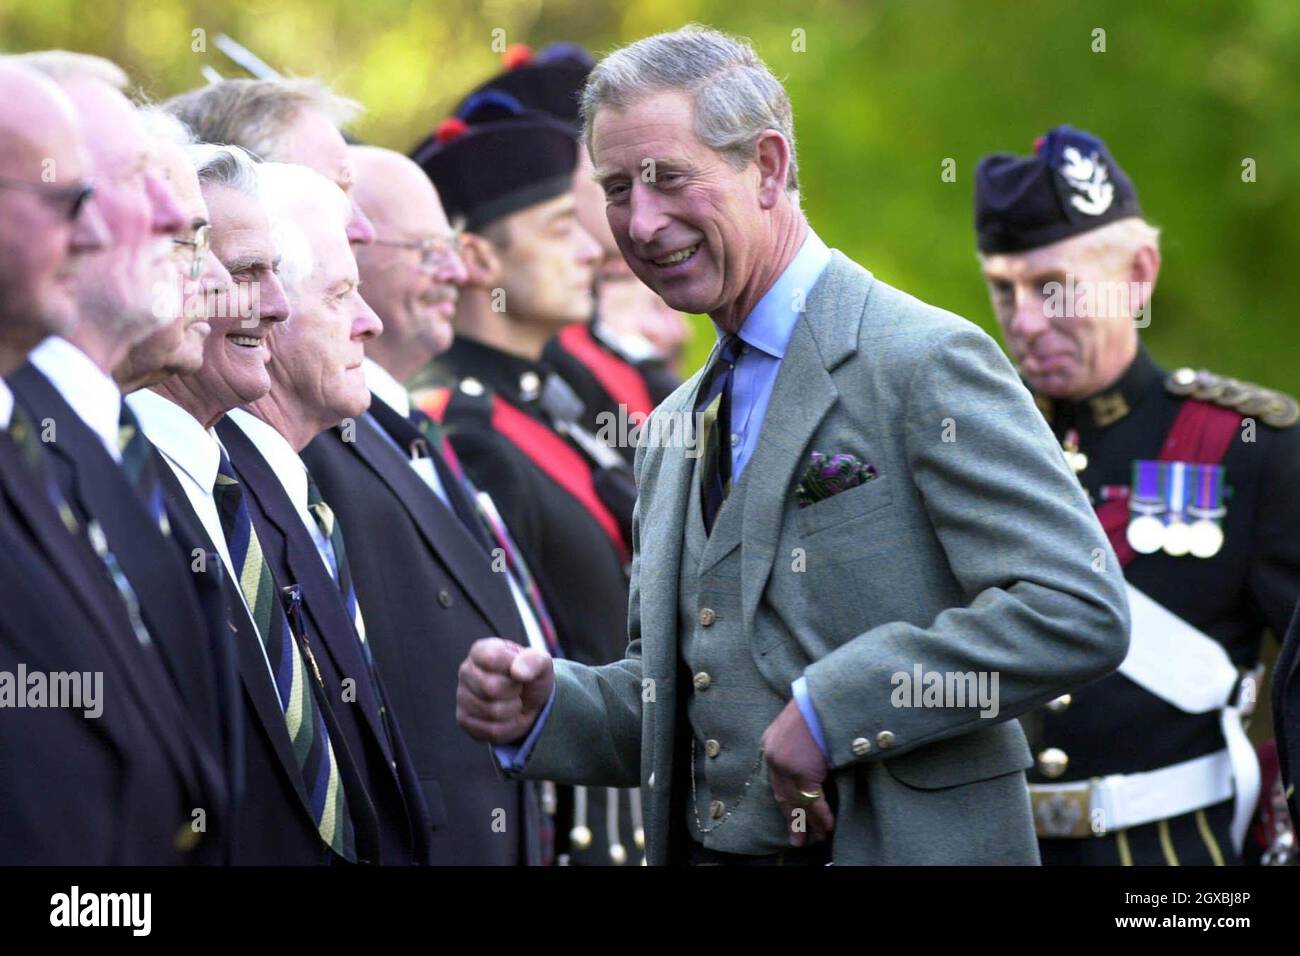 The Prince Of Wales, the Duke of Rothesay, at the Gordon Highlanders Museum in Aberdeen where he views a parade during a ceremony  to lay up the Regiment's last colours.   Stock Photo